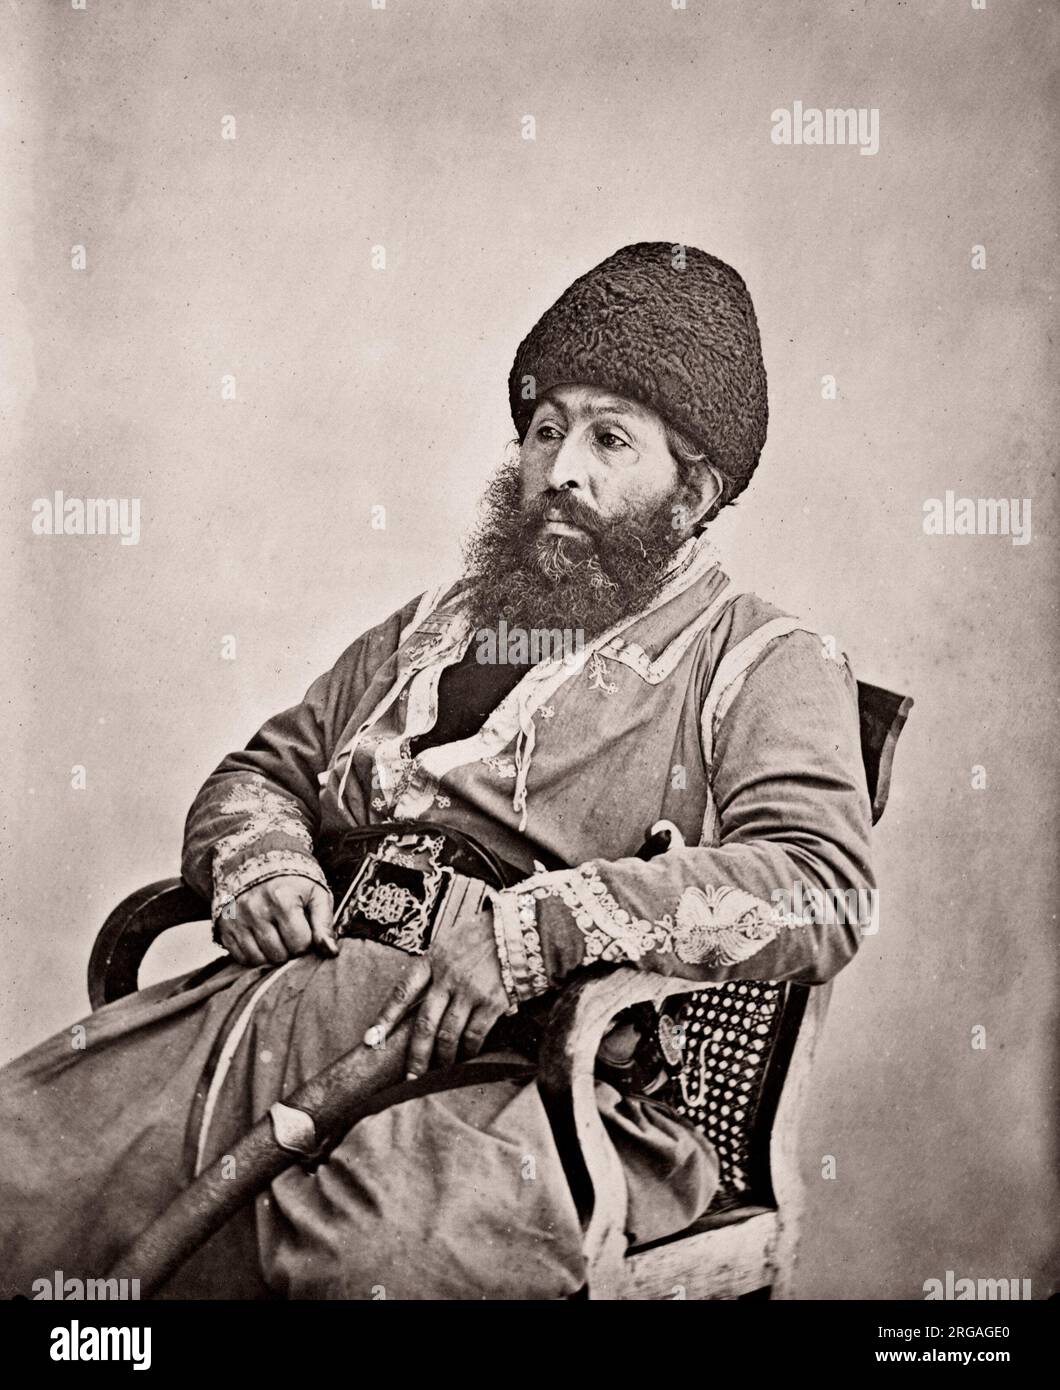 19th century vintage photograph India - the Amir of Kabul Afghanistan Shepherd and Robertson, 1860s Stock Photo